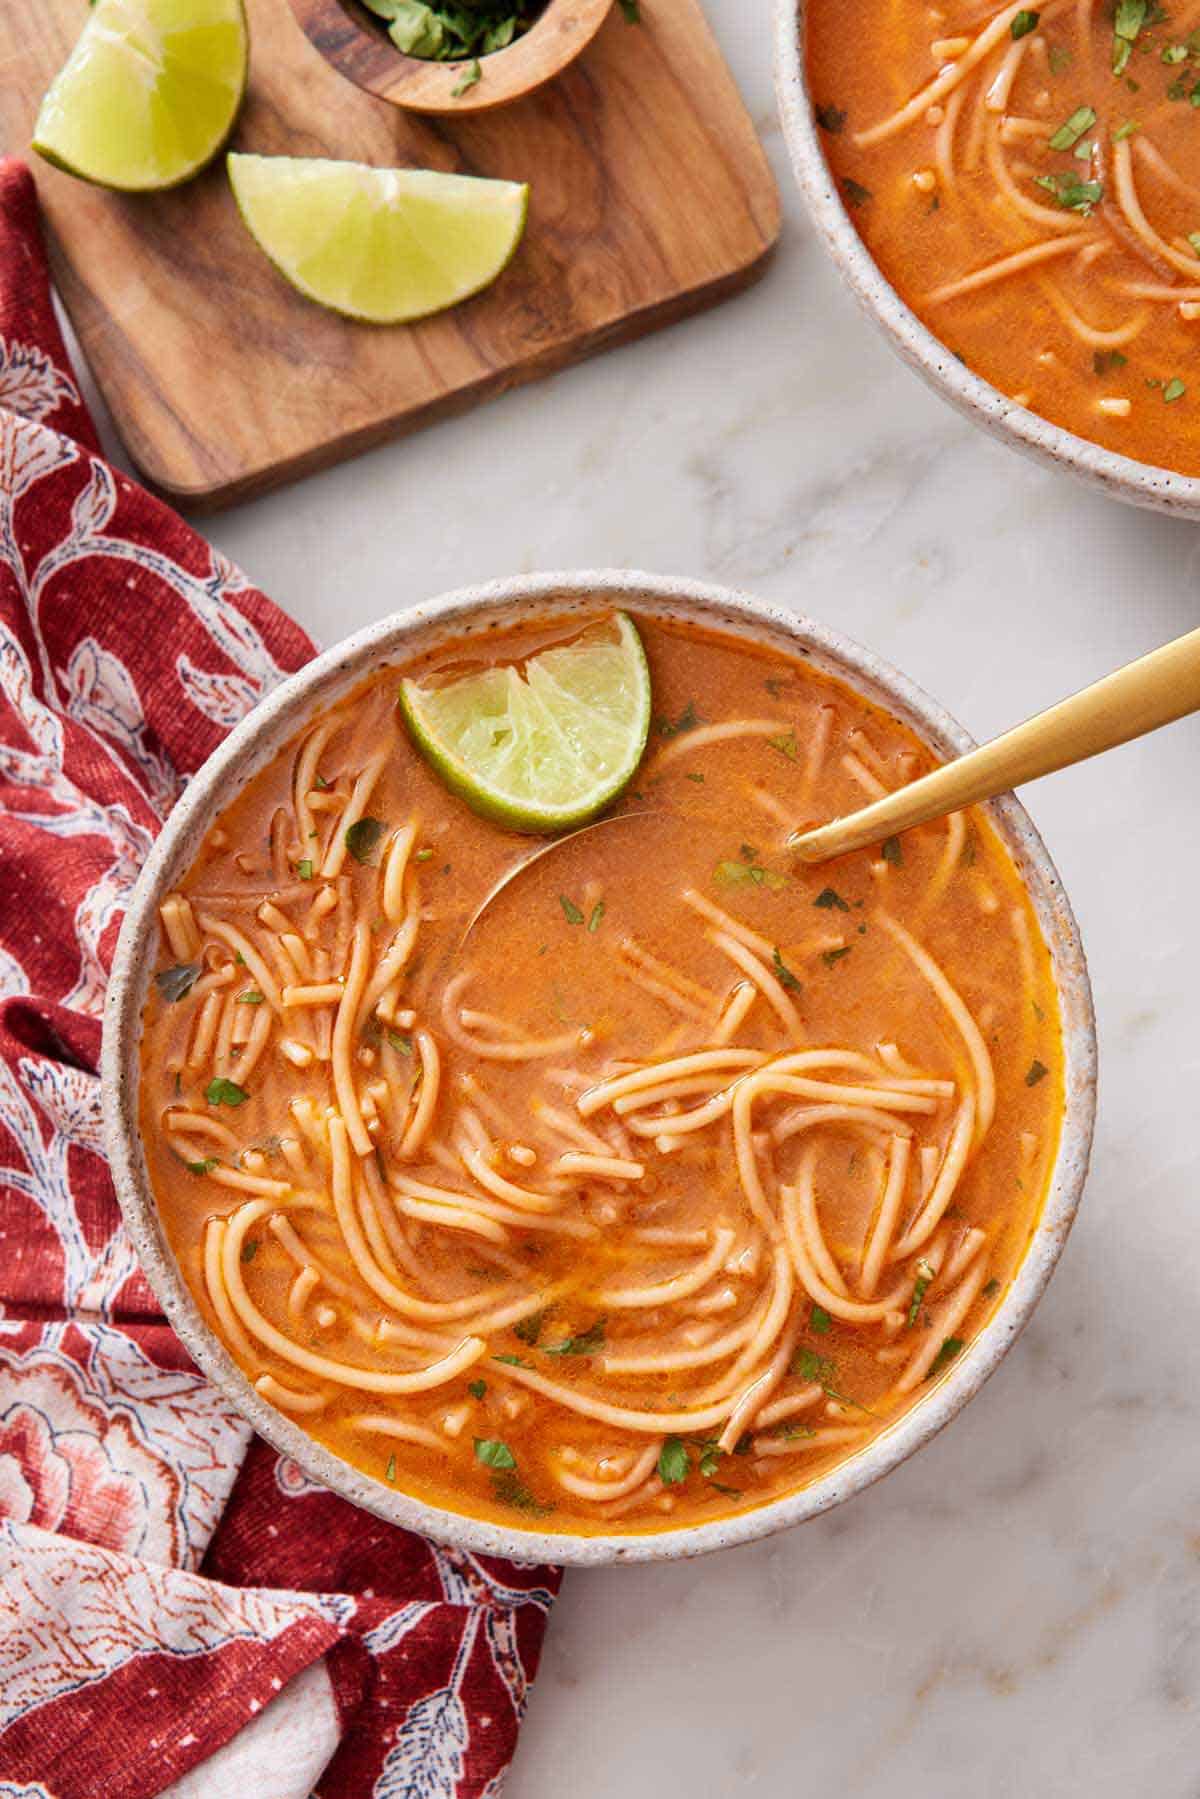 Overhead view of a bowl of sopa de fideo with a spoon and lime inside. Some sliced lime and another bowl of soup on the side.